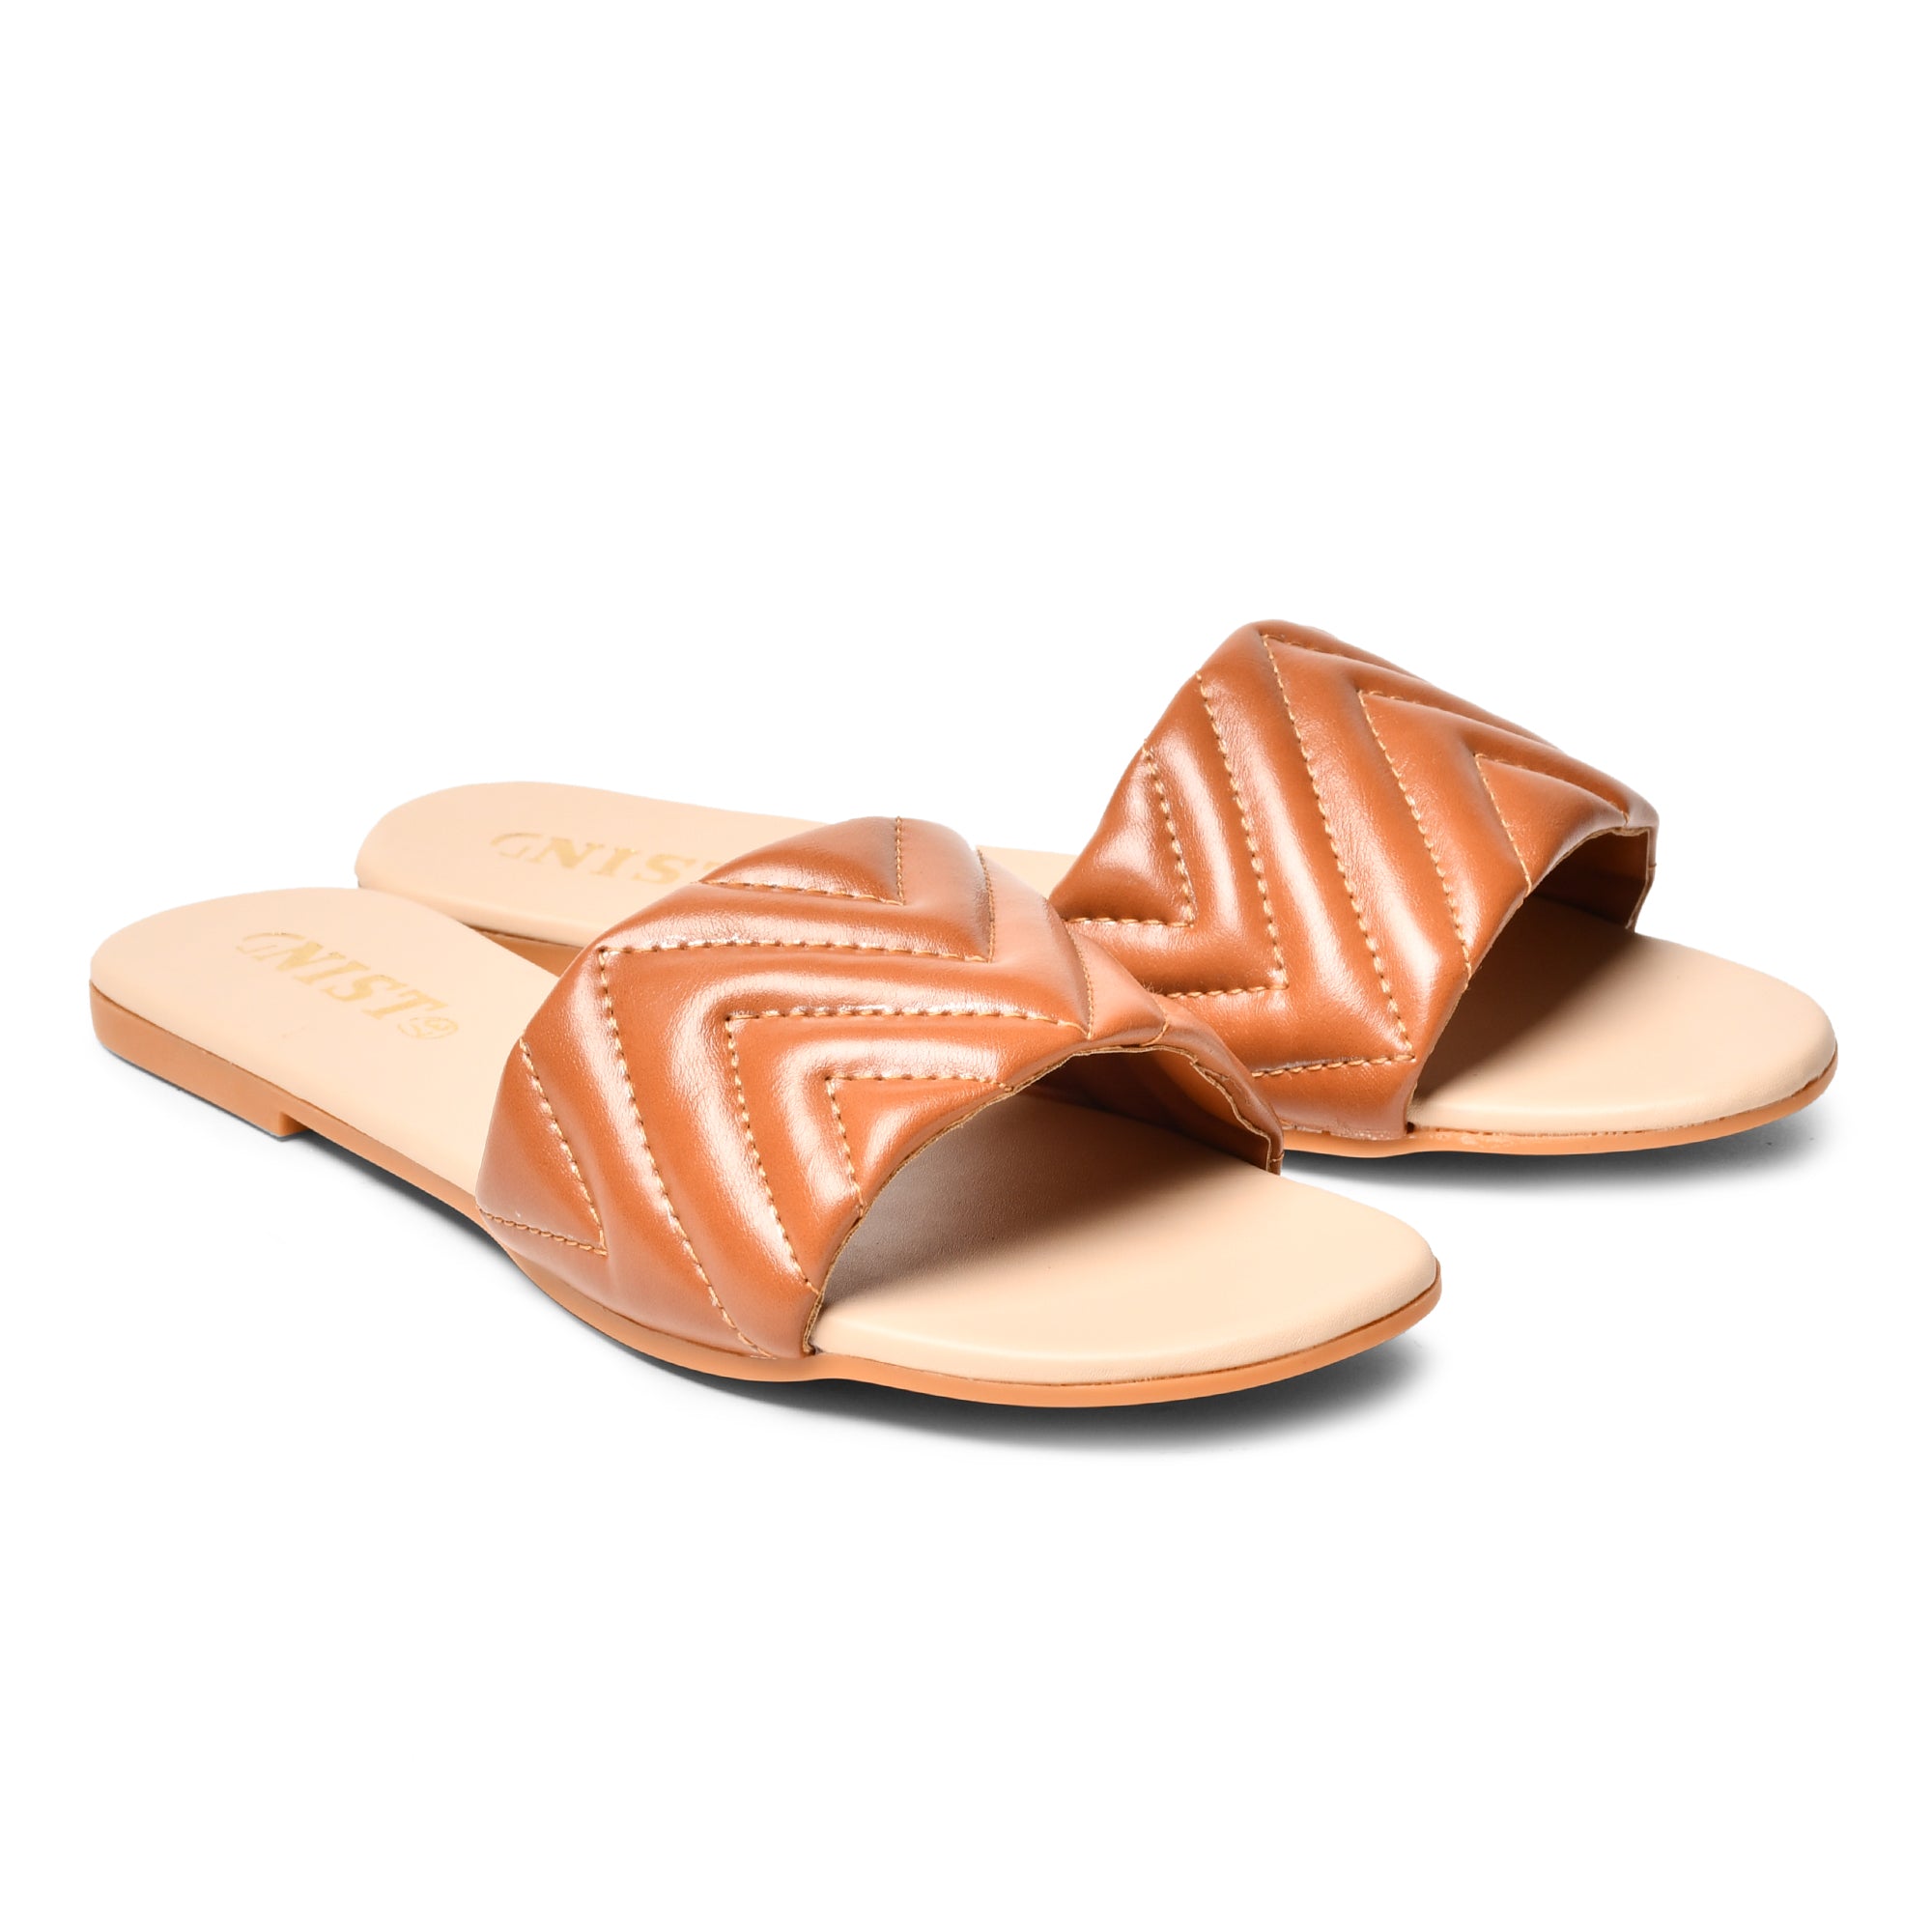 GNIST GG Quilted Faux Leather Tan Sandal